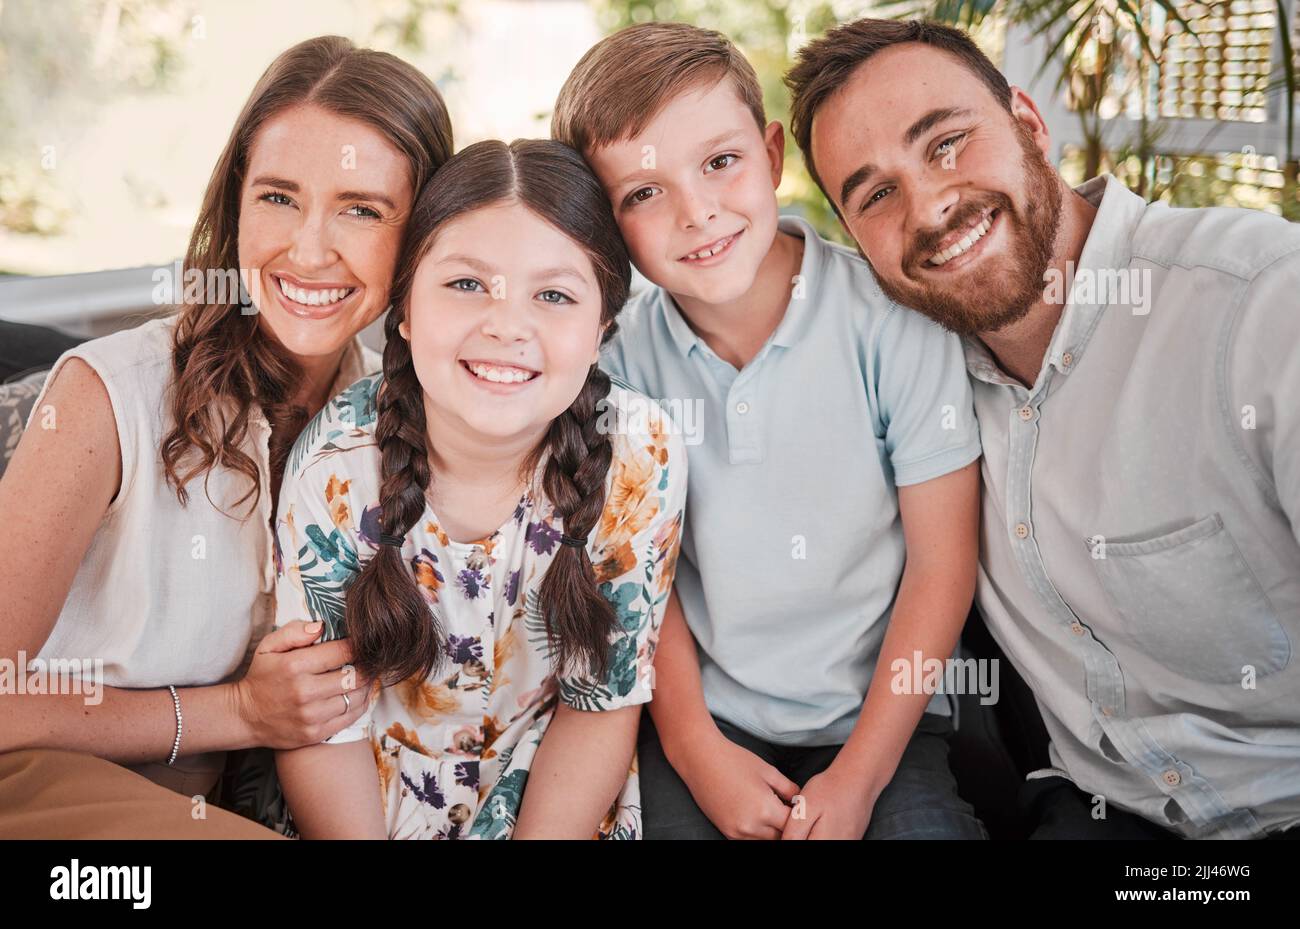 Activate your joy. a young family happily bonding together on the sofa at home. Stock Photo